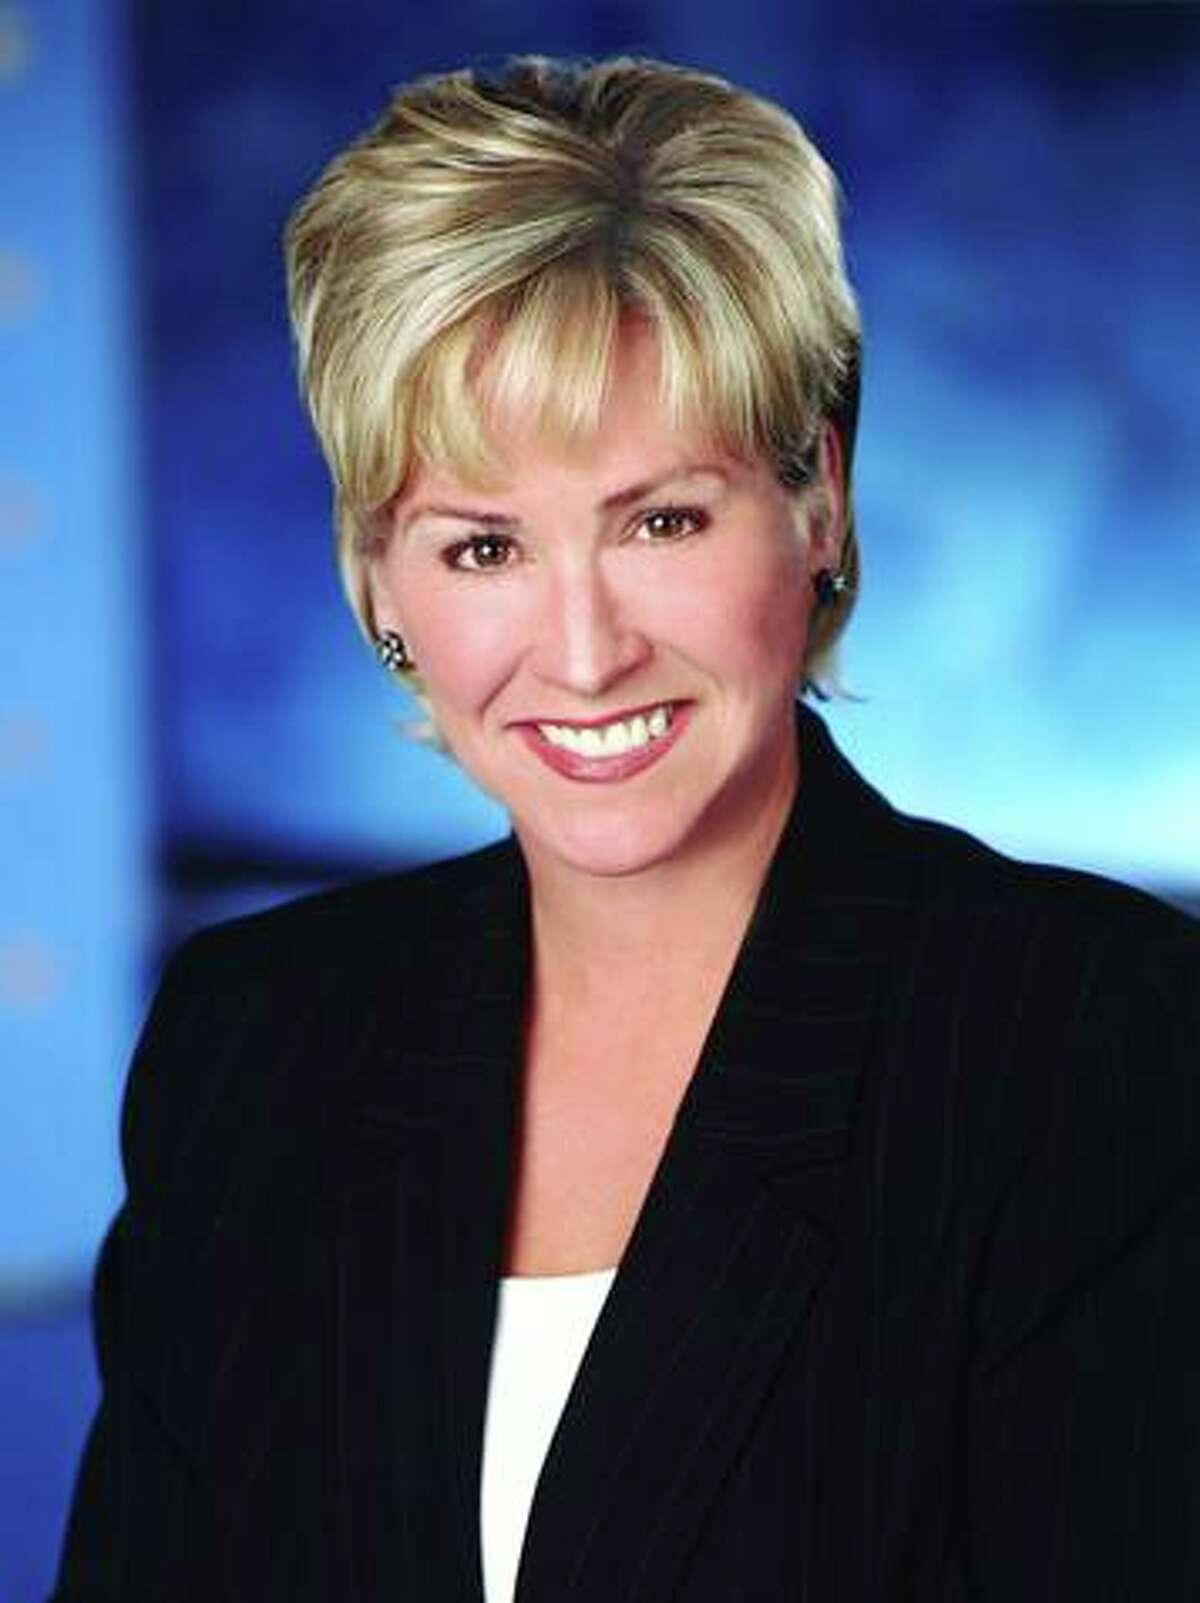 Leslie Griffith had anchored the 10 p.m. newscast on KTVU, Channel 2, until 2006.